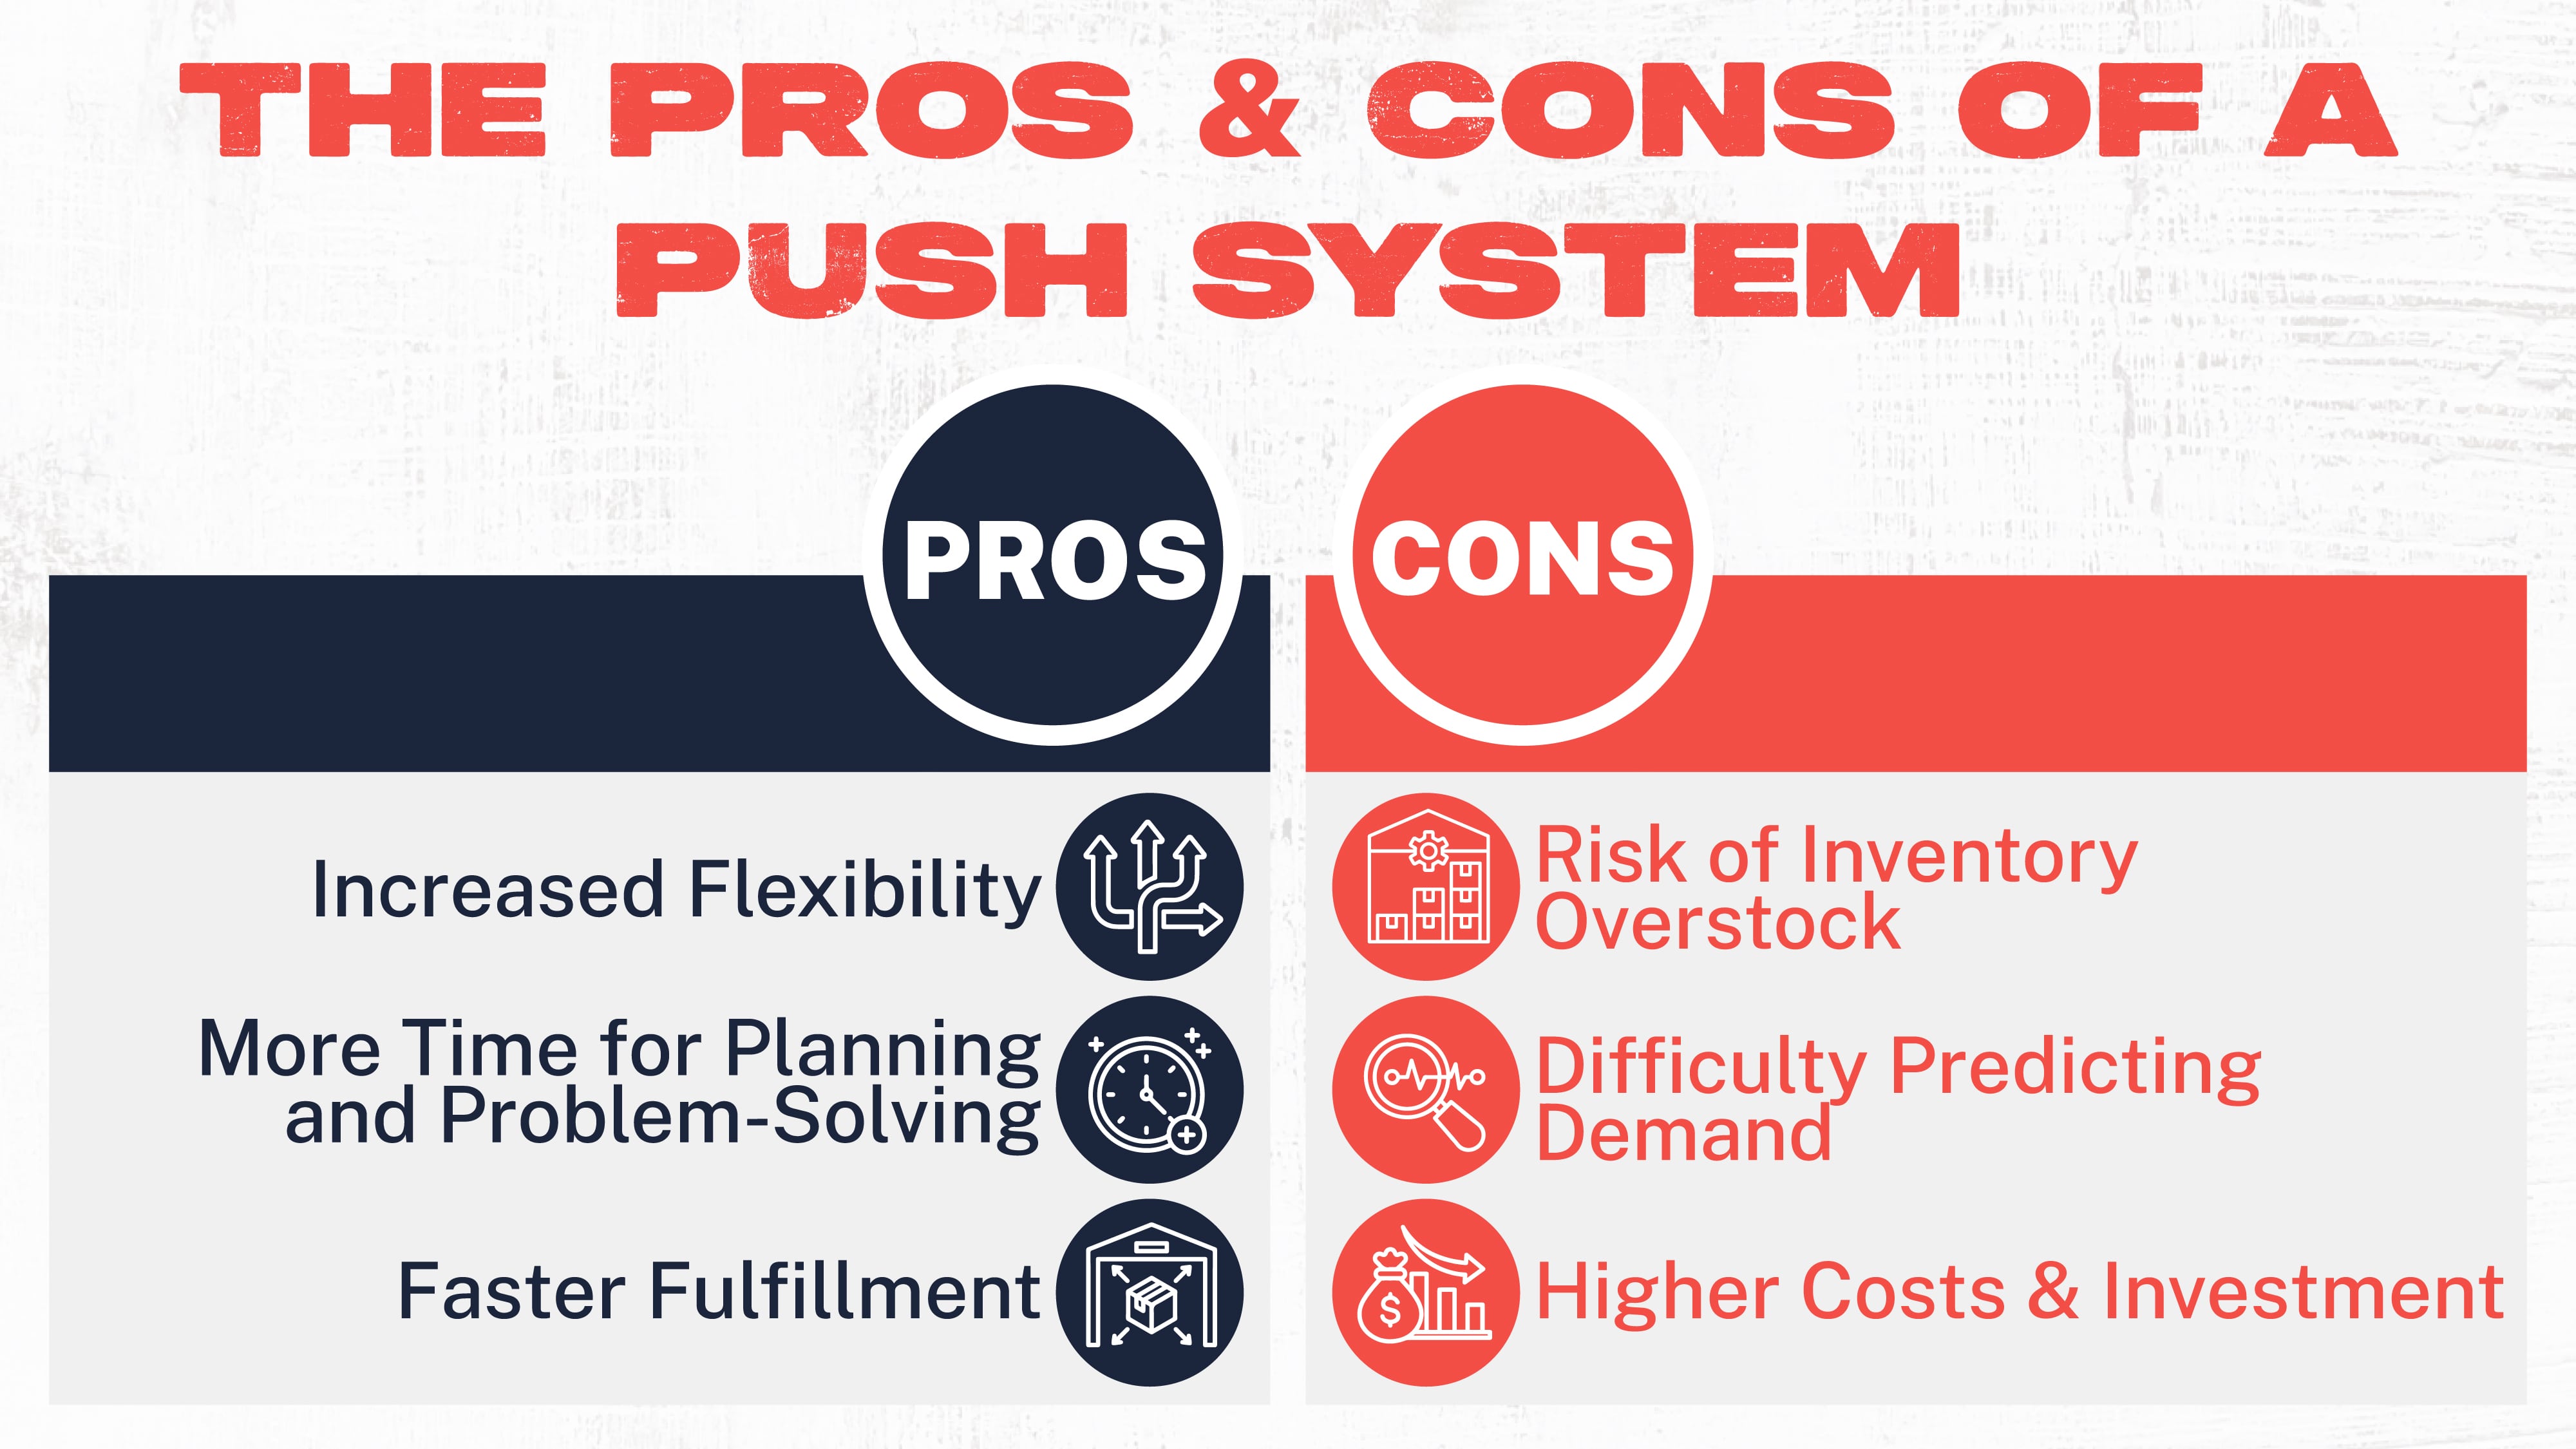 THE PROS & CONS OF A PUSH SYSTEM